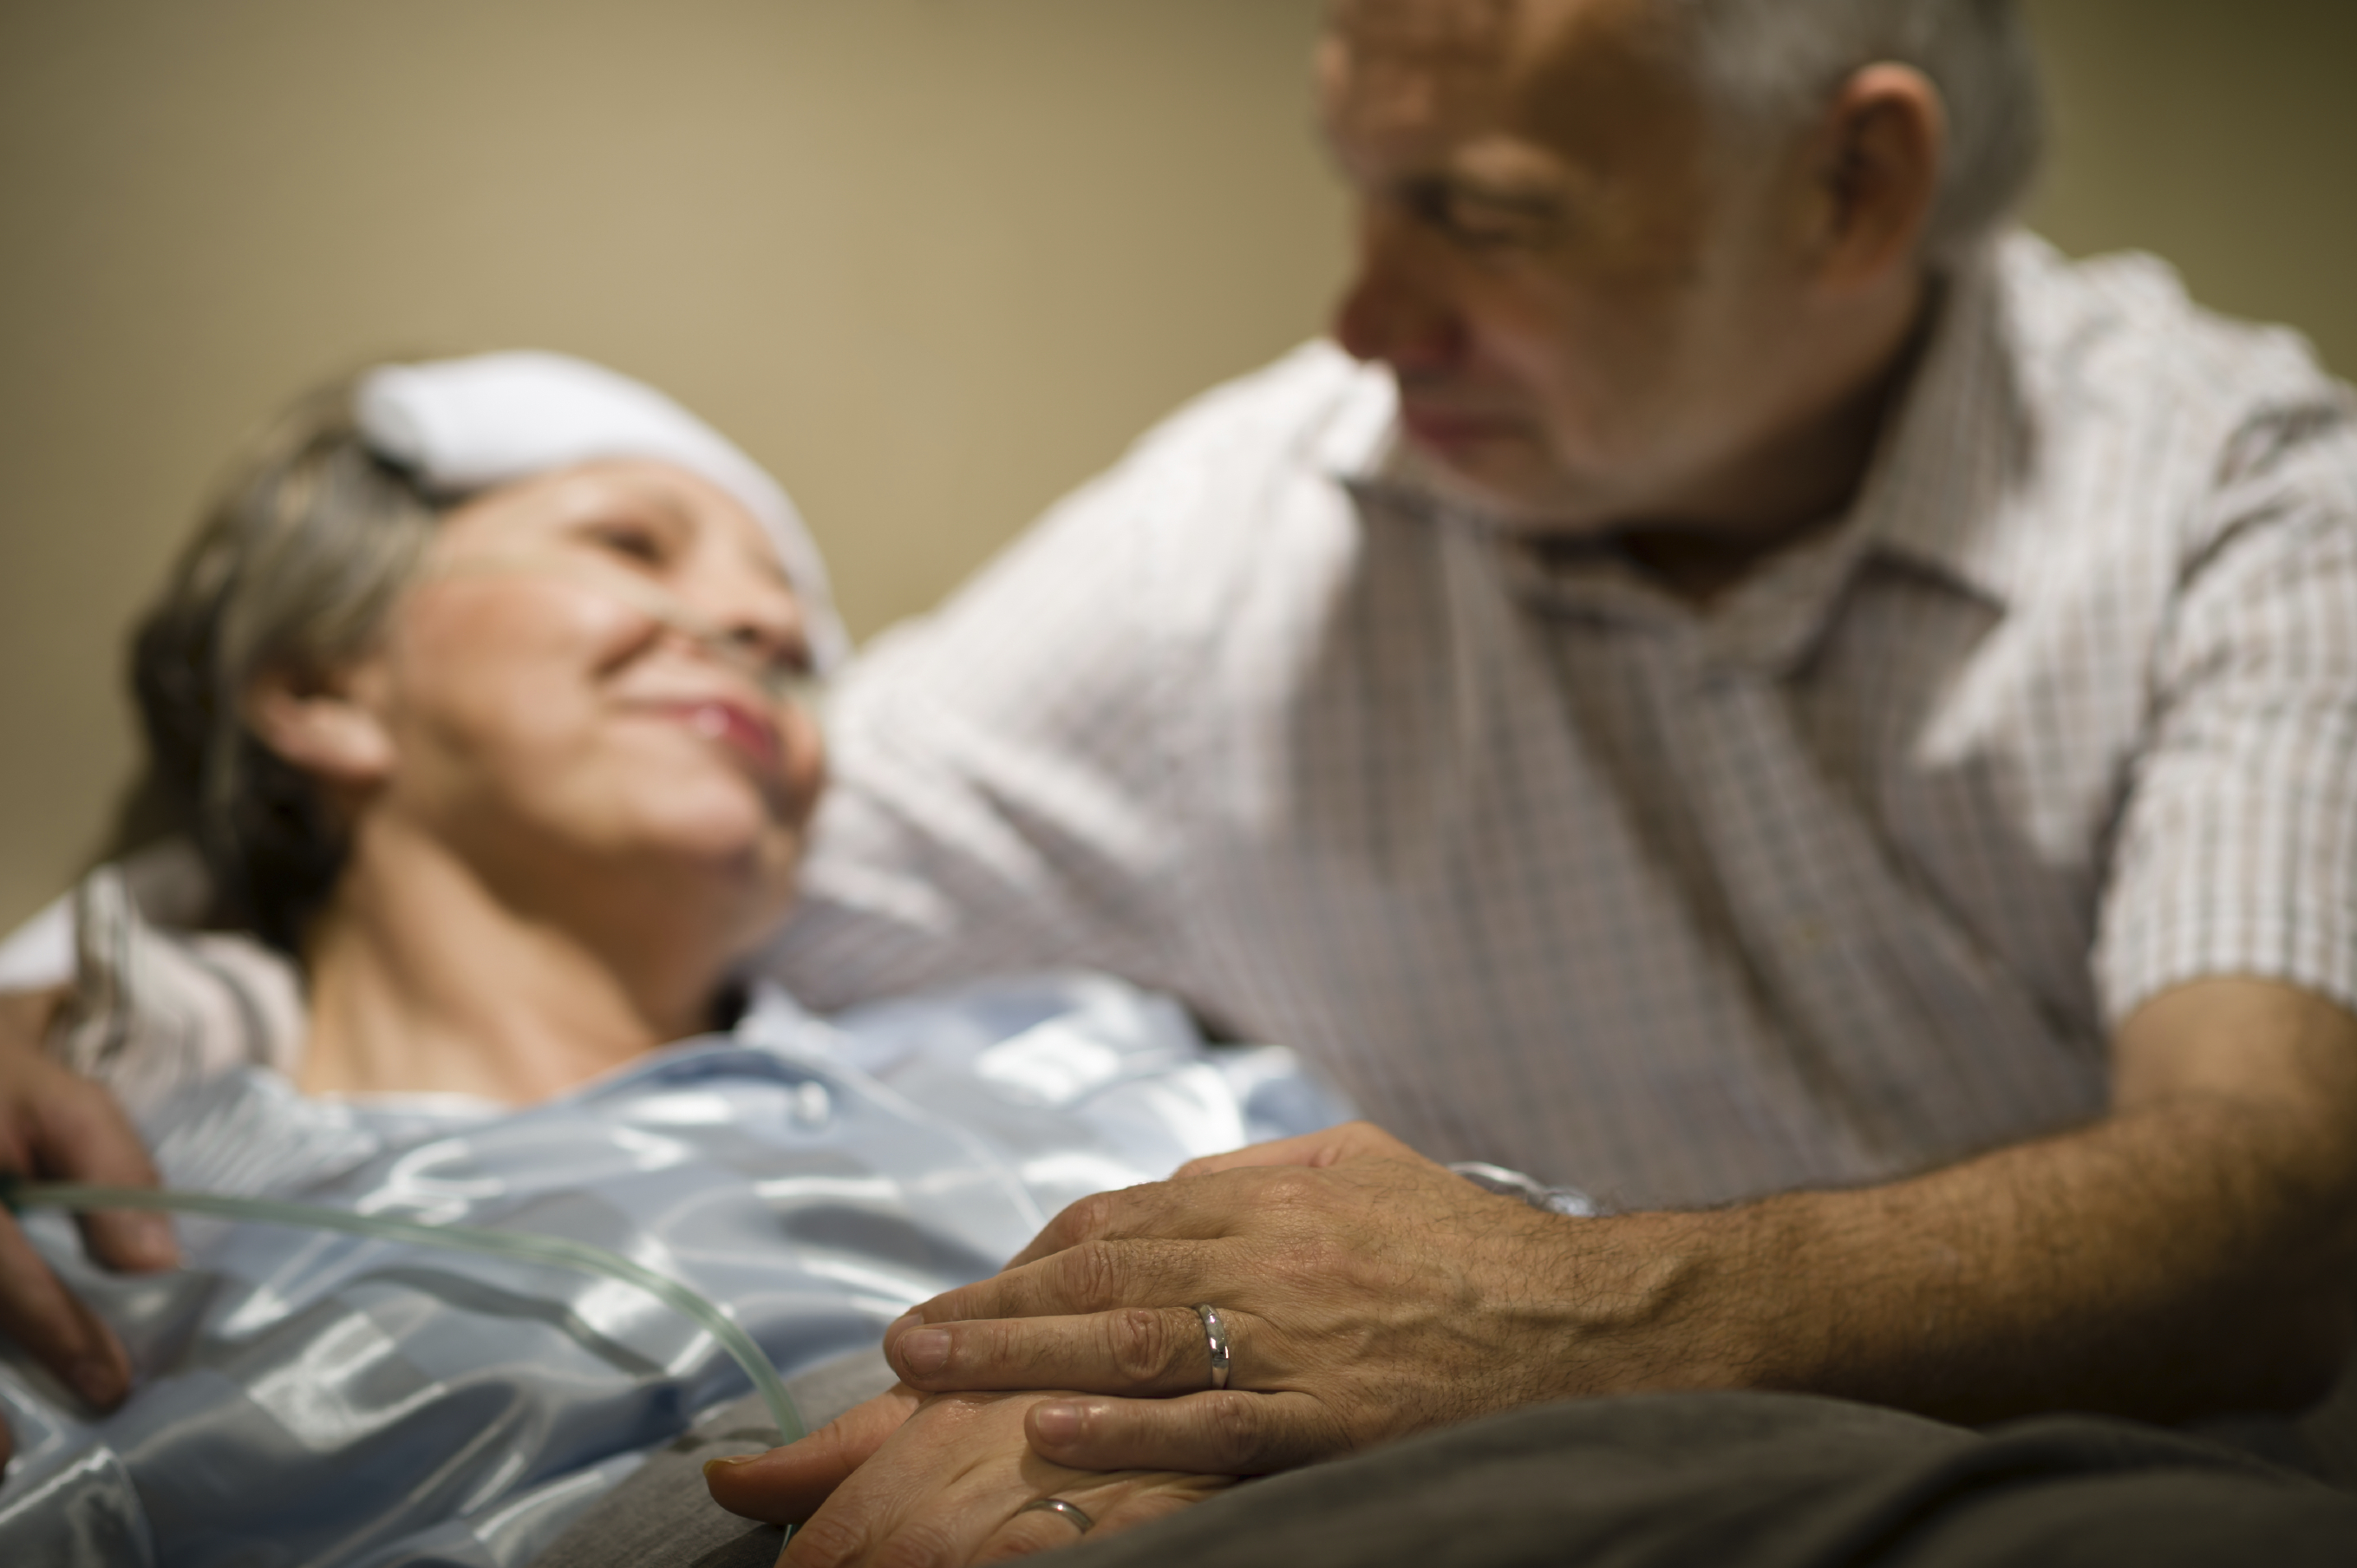 Home palliative care a key to respecting end of life wishes